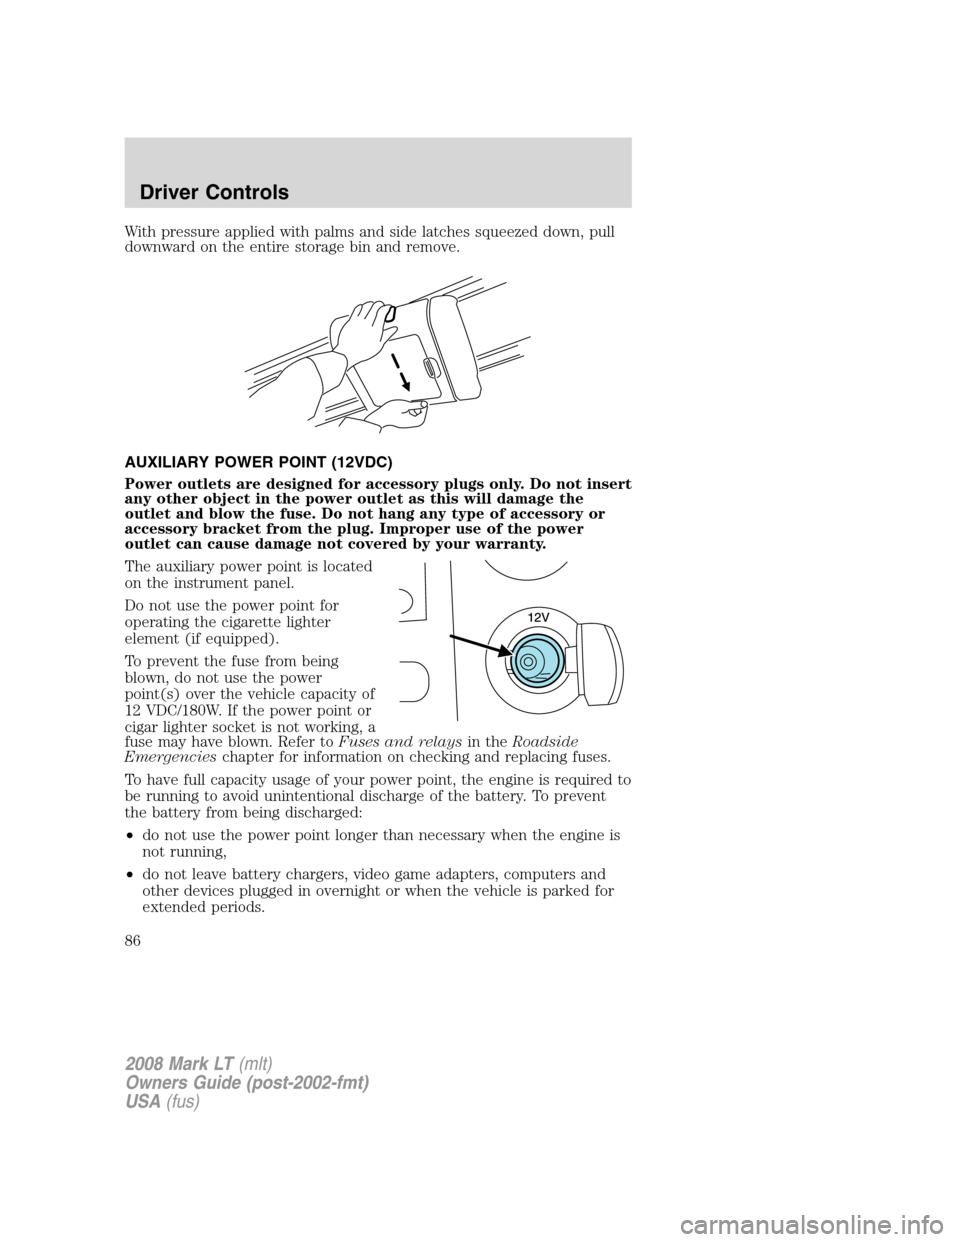 LINCOLN MARK LT 2008  Owners Manual With pressure applied with palms and side latches squeezed down, pull
downward on the entire storage bin and remove.
AUXILIARY POWER POINT (12VDC)
Power outlets are designed for accessory plugs only. 